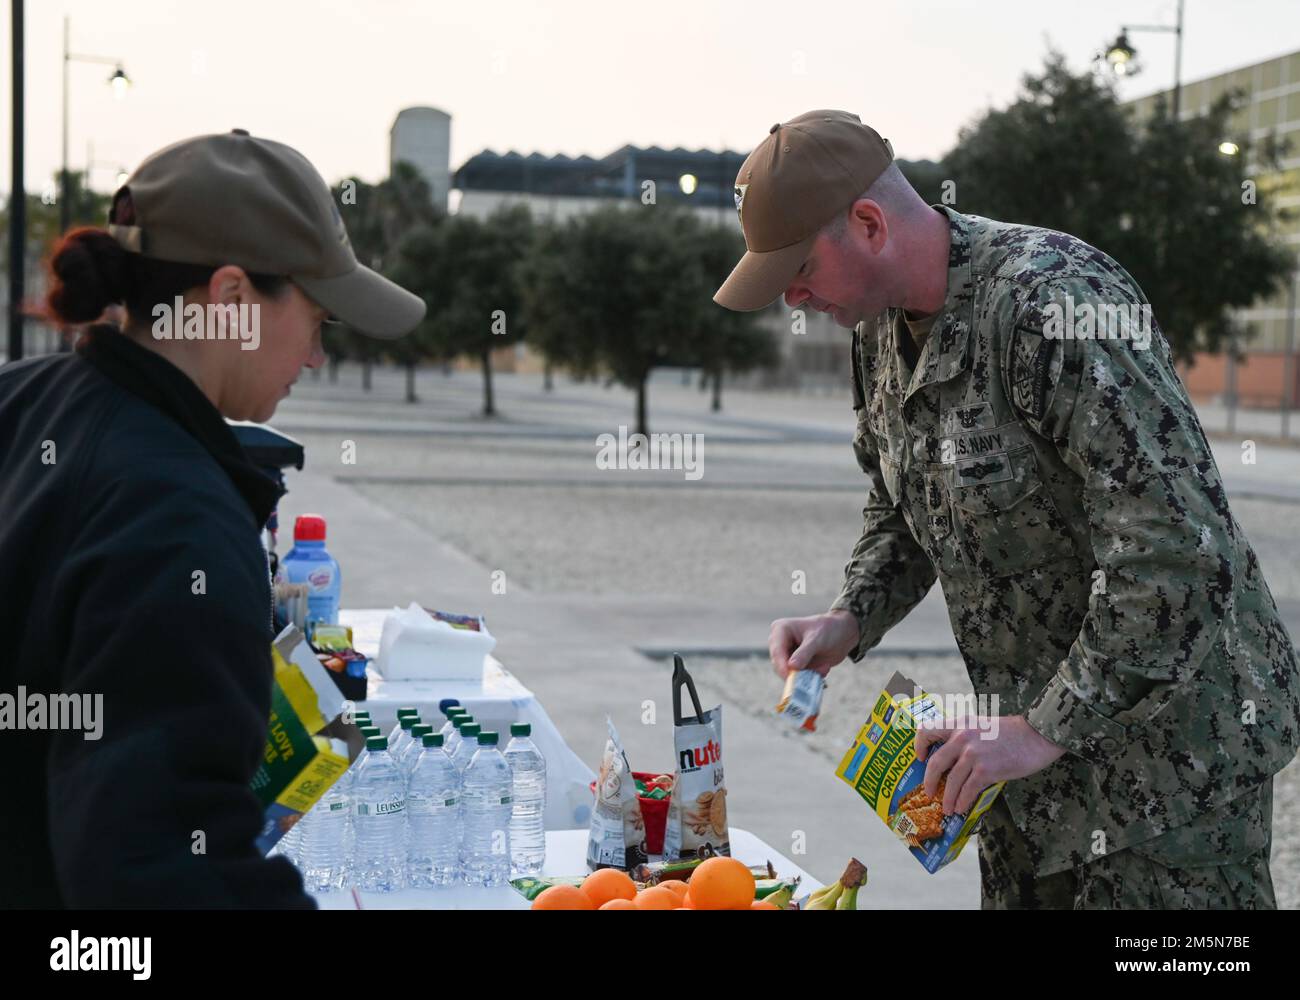 220329-N-GK686-1021 NAVAL AIR STATION SIGONELLA, Italy (Mar. 29, 2022) – Senior Chief Aviation Boatswain’s Mate (Equipment) David Hooker, from Jacksonville, Fla., stocks the food to hand out to service members in honor of the upcoming Chief’s Birthday on Naval Air Station Sigonella, Mar. 29, 2022. NAS Sigonella’s strategic location enables U.S., allied, and partner nation forces to deploy and respond as required, ensuring security and stability in Europe, Africa and Central Command. Stock Photo